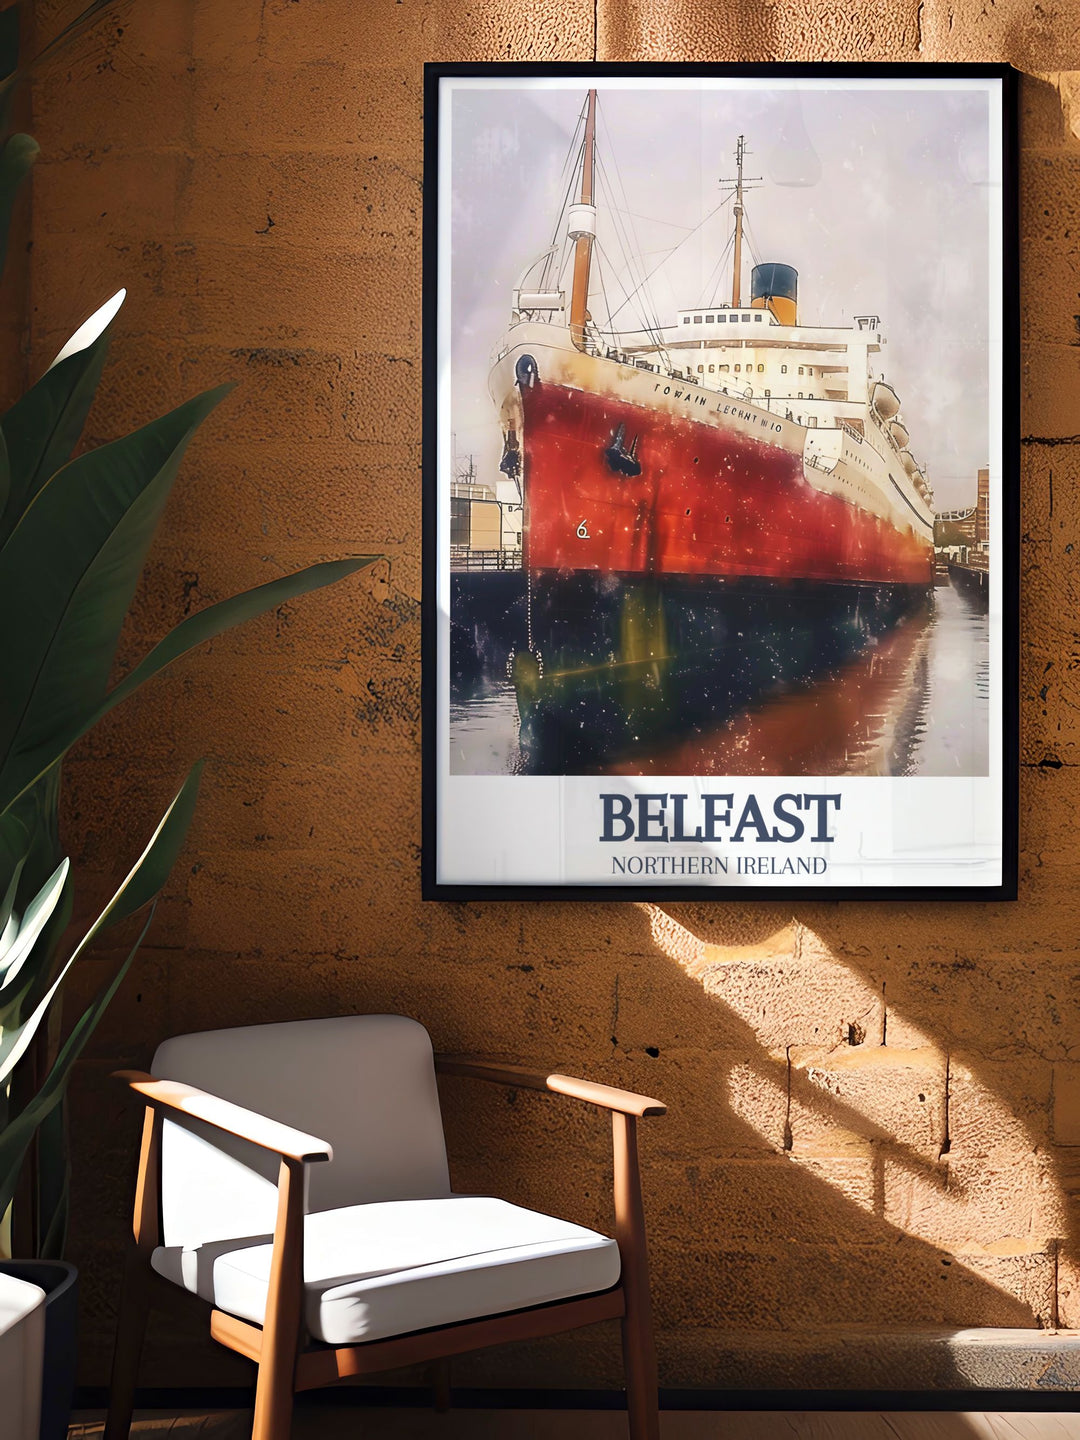 Captivating Titanic Belfast SS Nomadic wall art showcasing Belfasts iconic shipbuilding landmarks. Ideal for home decor, these Ireland artworks bring a touch of UK charm and sophistication to any space, making them perfect gifts.